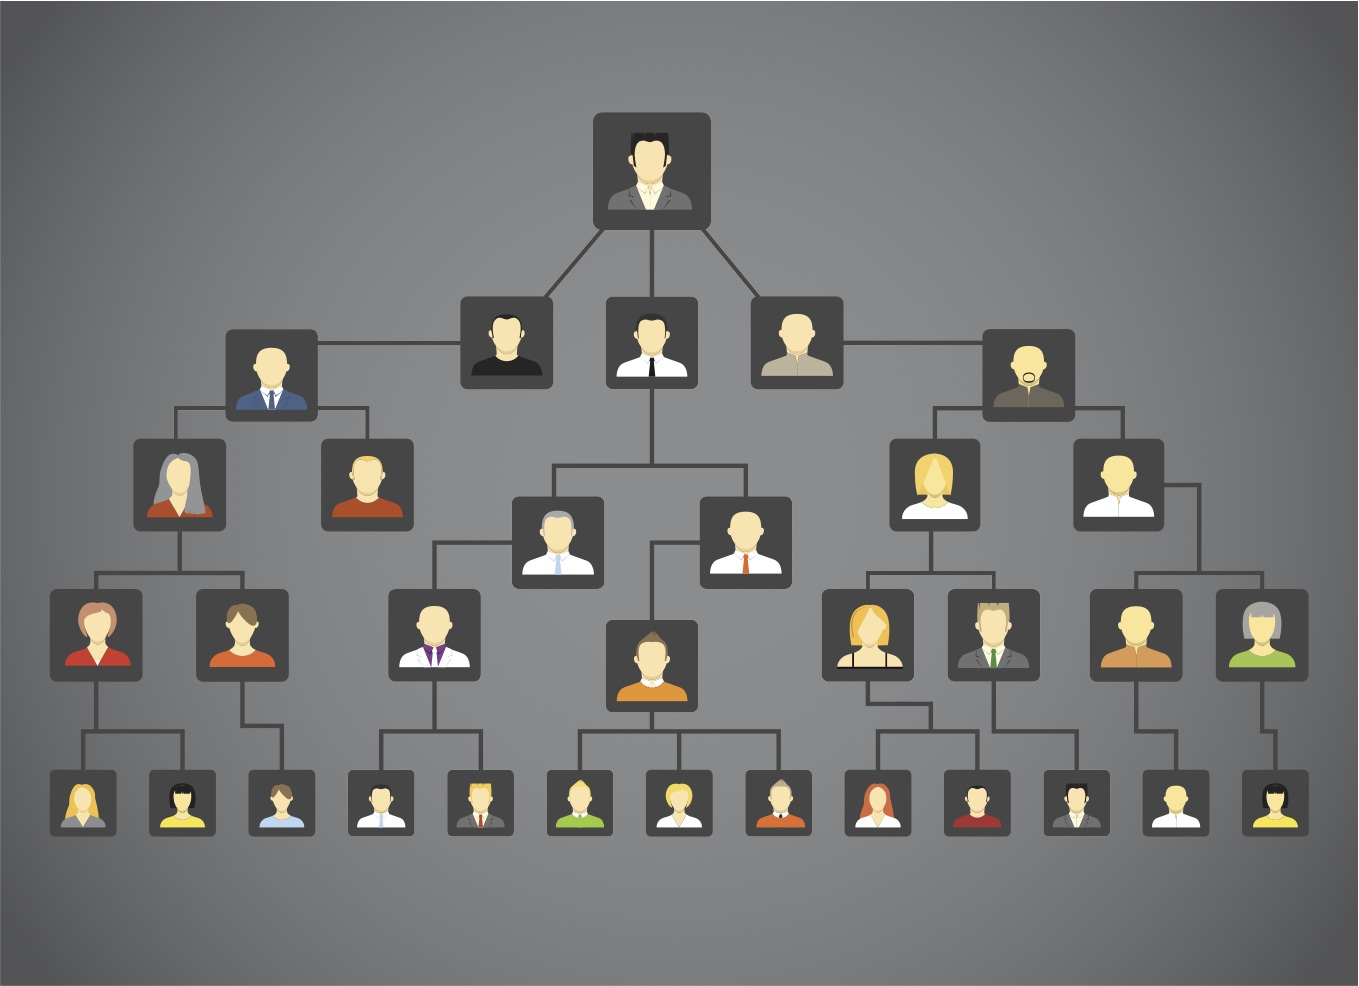 Genealogy, Tracing Ancestry, Family History & Lineage